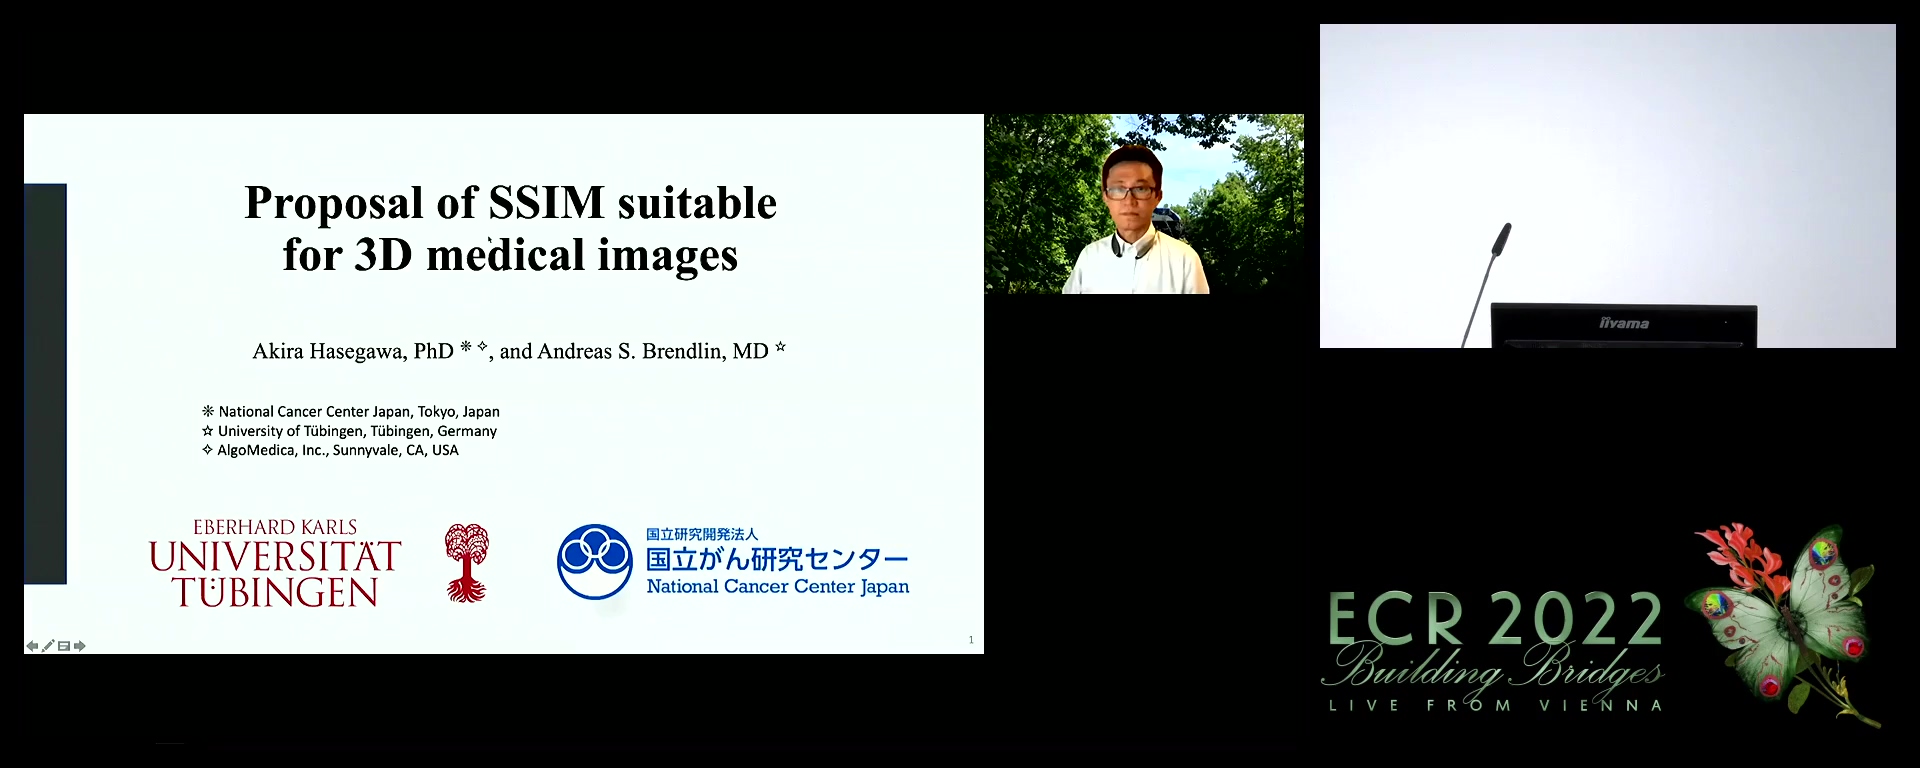 Proposal of SSIM suitable for 3D medical images - Akira Hasegawa, Chapel Hill / US